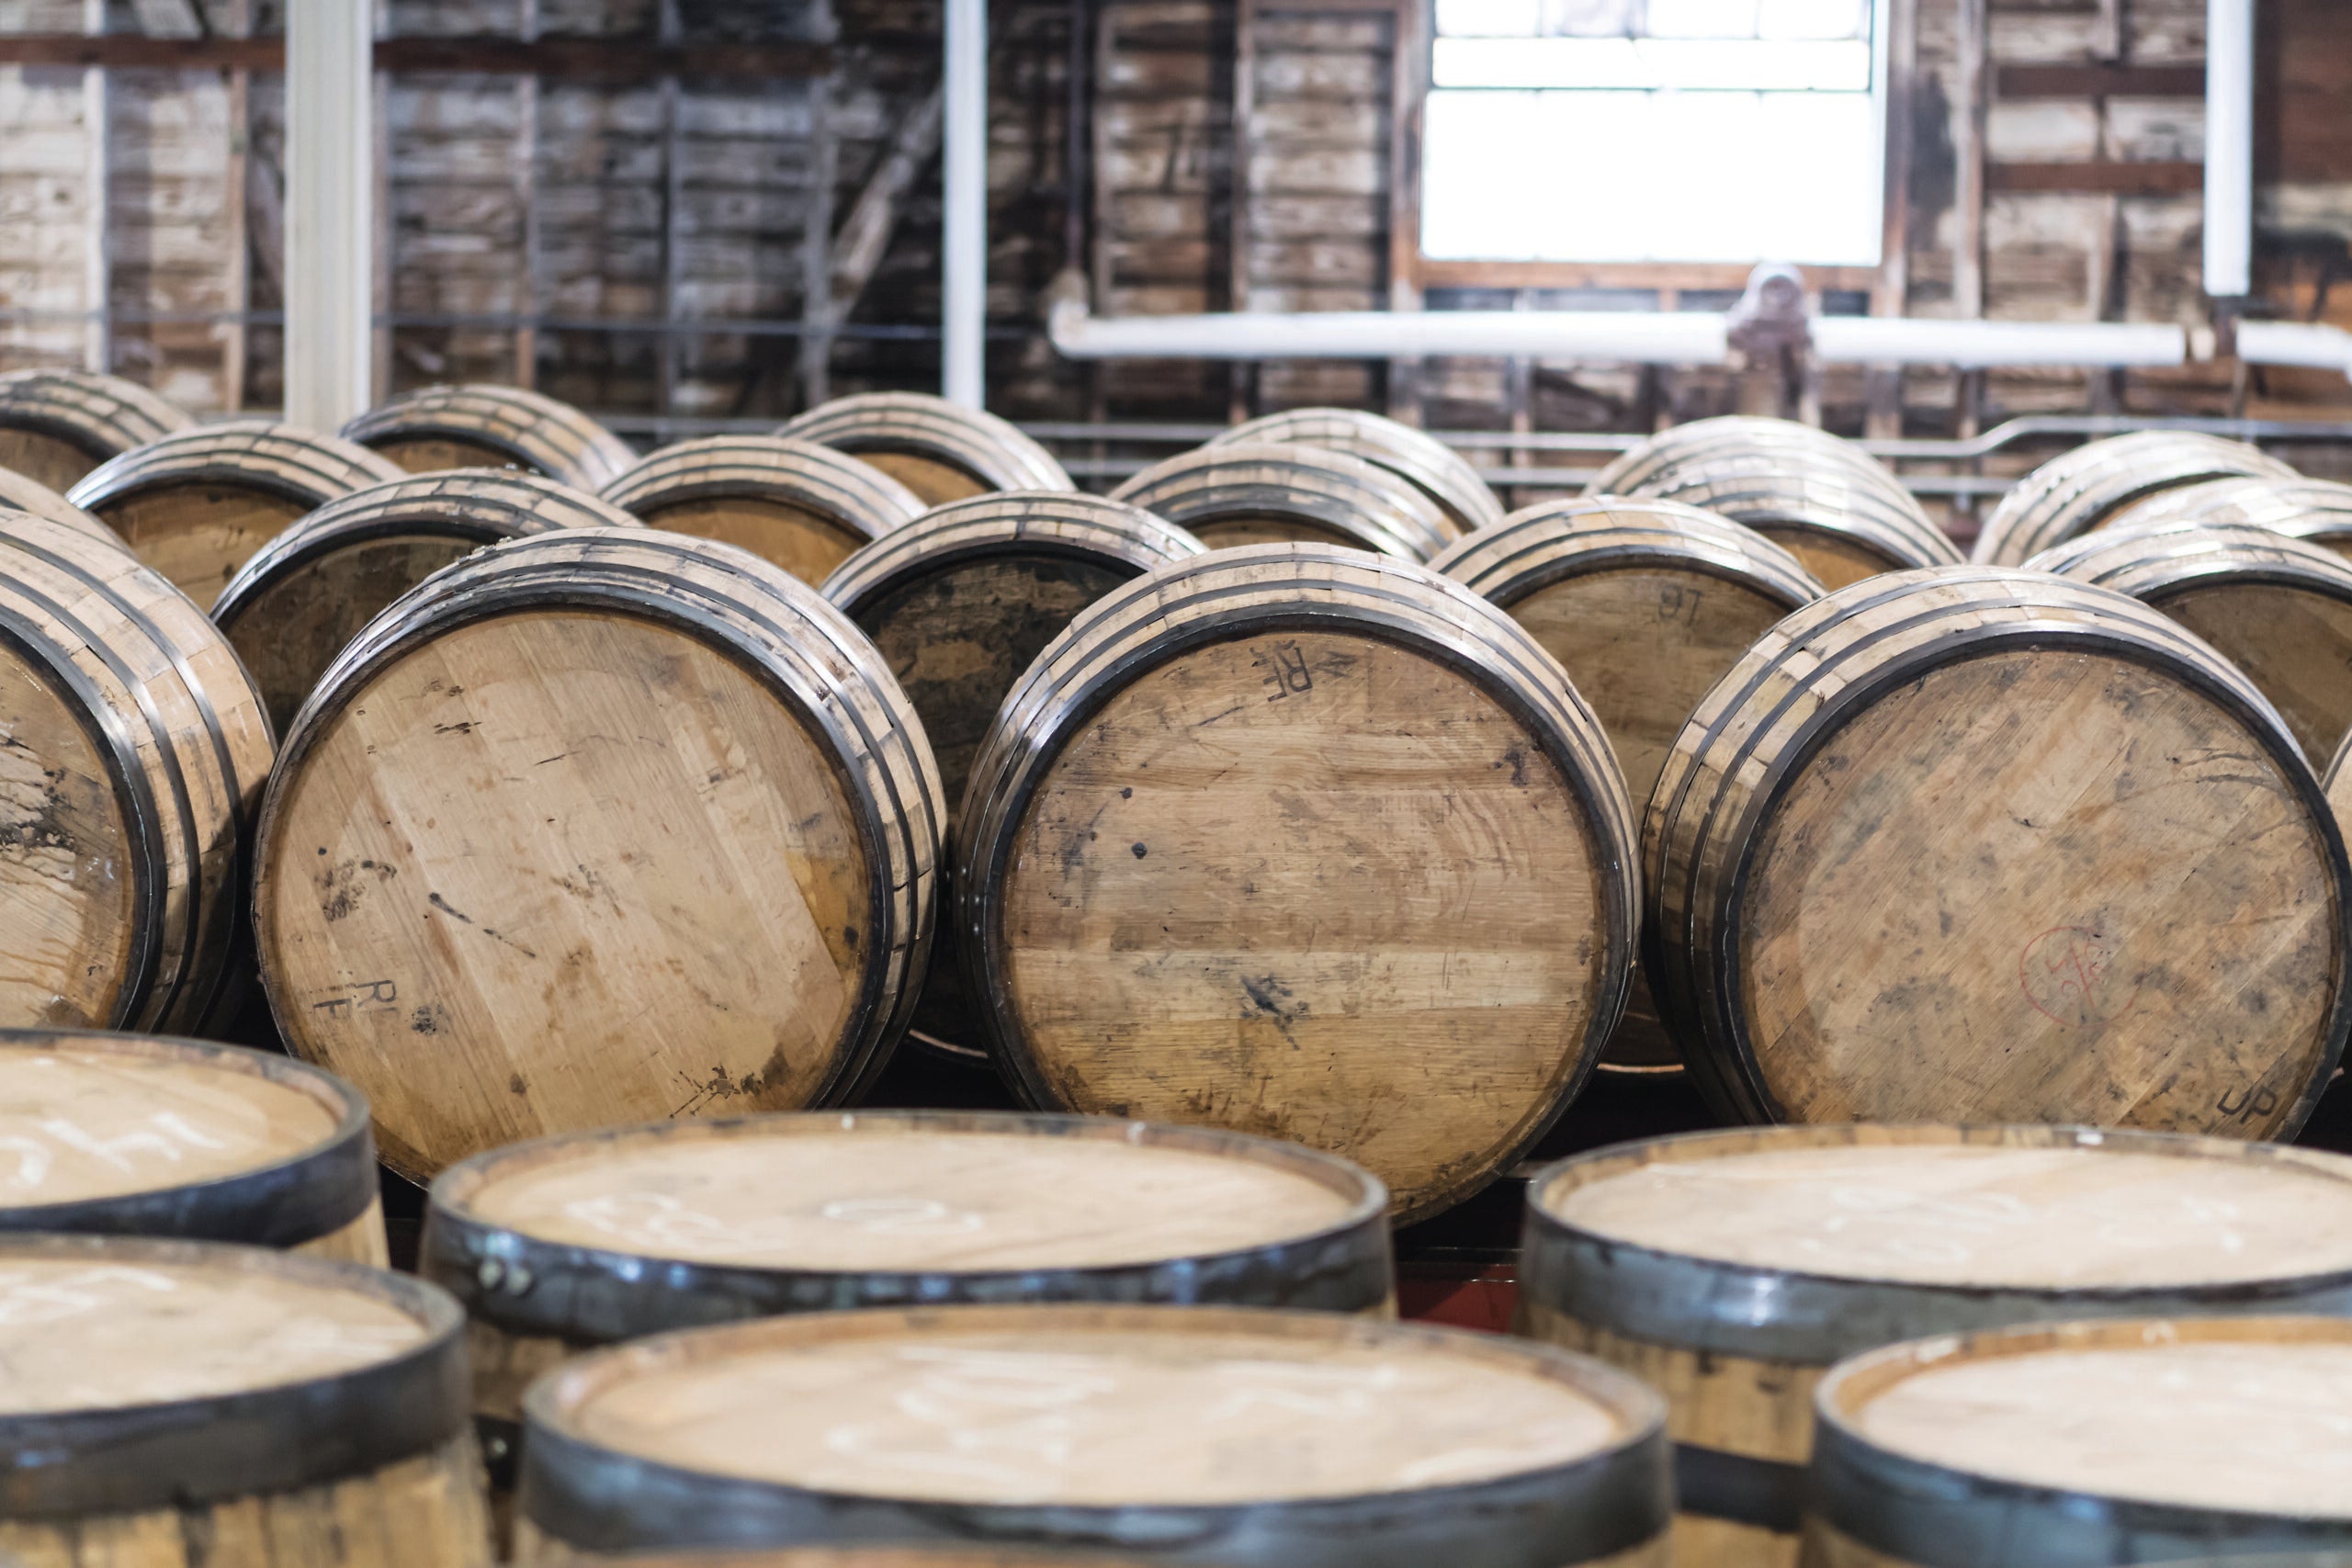 Kentucky Bourbon Trail Proves Worthy of a Flying Adventure